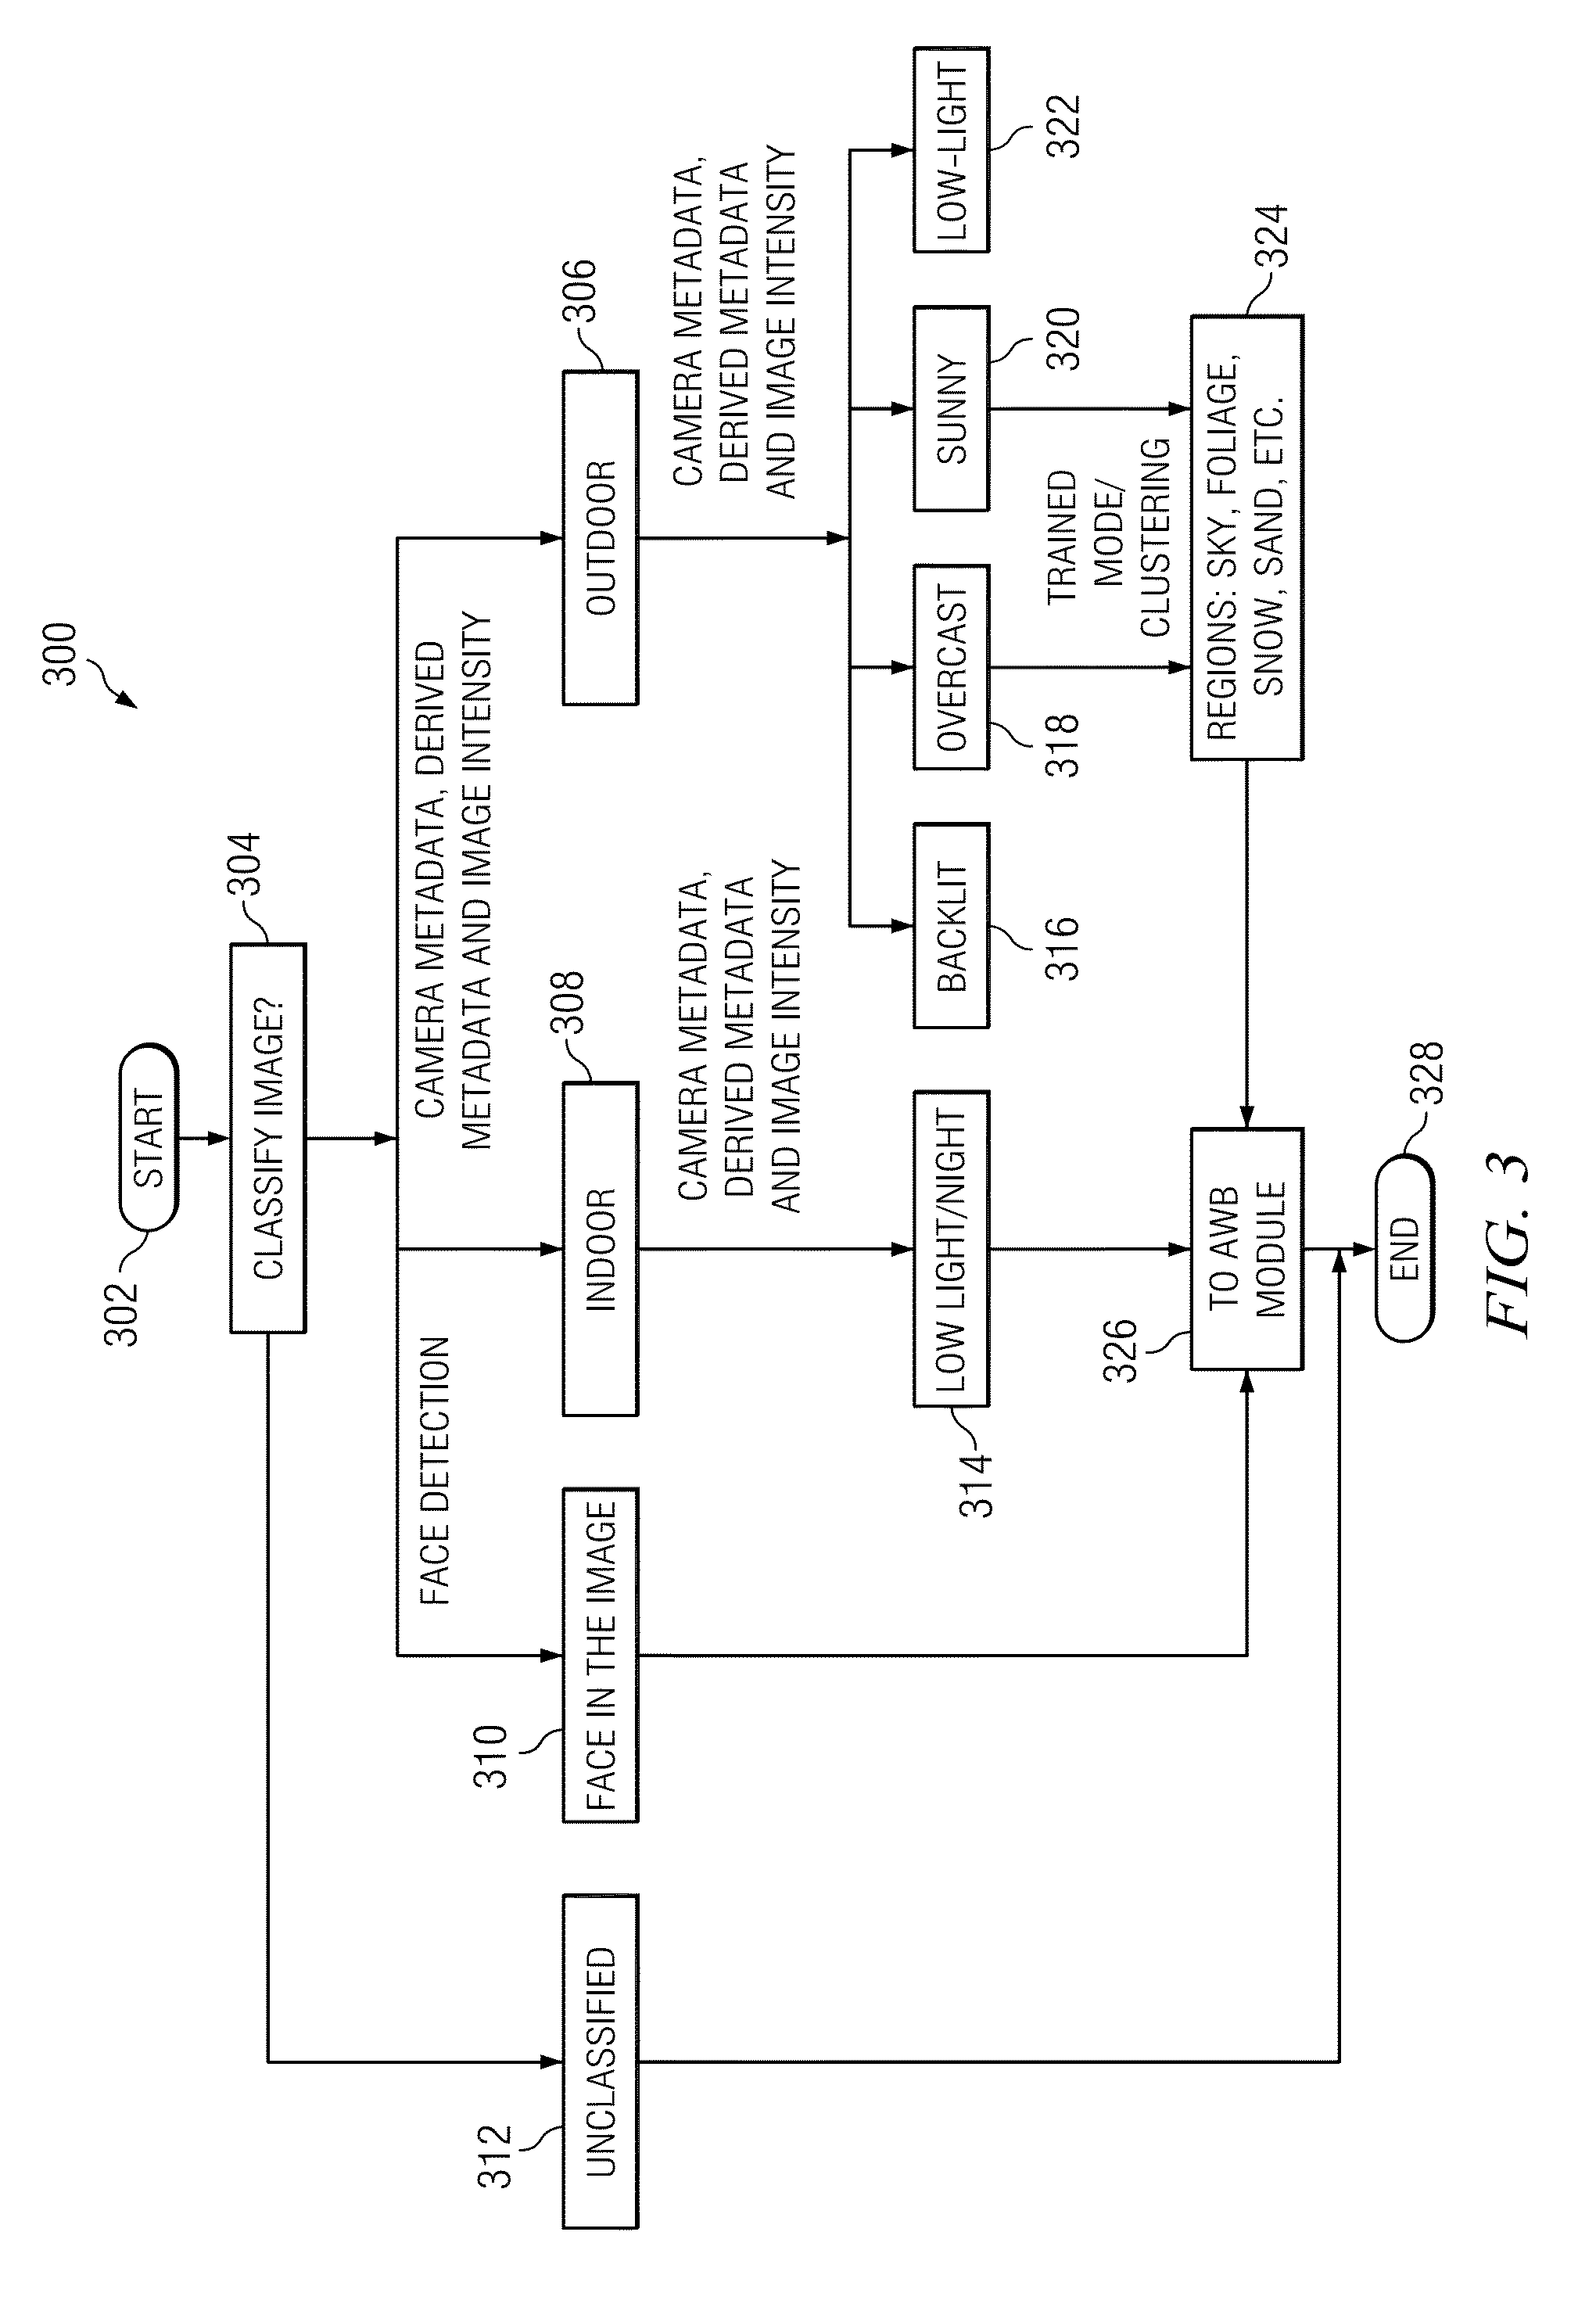 Method and apparatus for improving automatic white balance with scene information